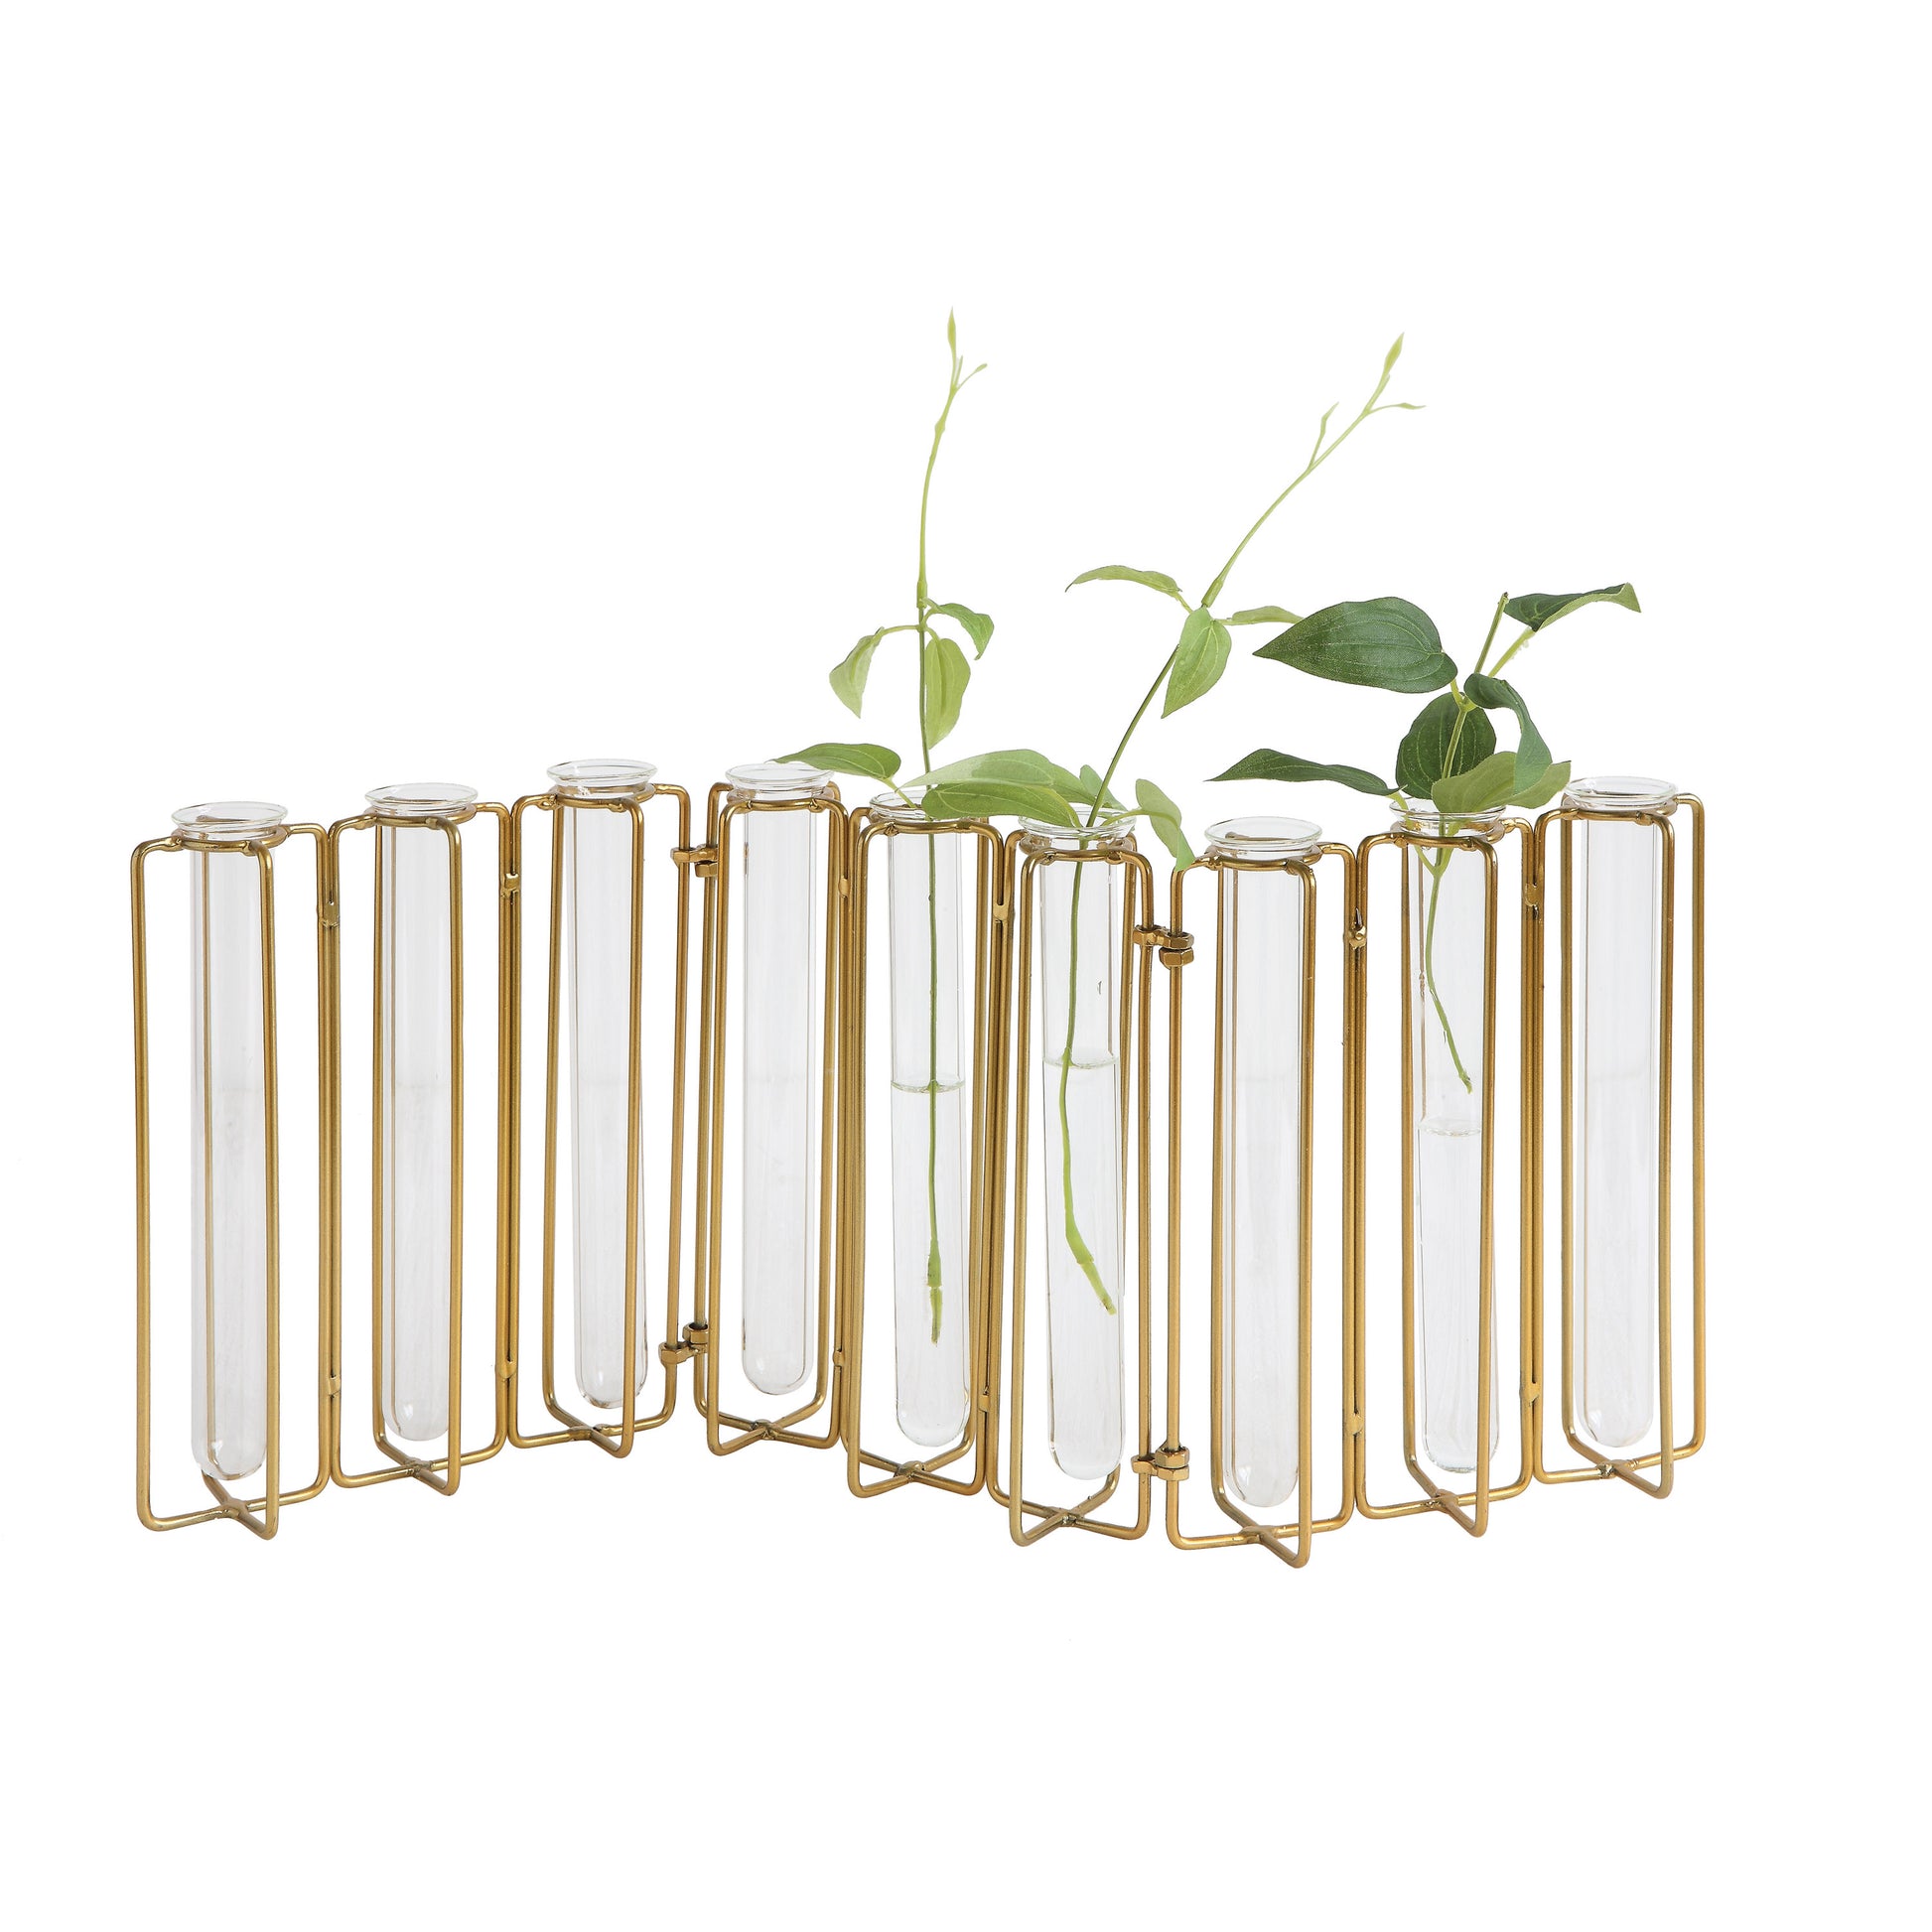 9 Test Tube Vases in a Single Gold Metal Stand